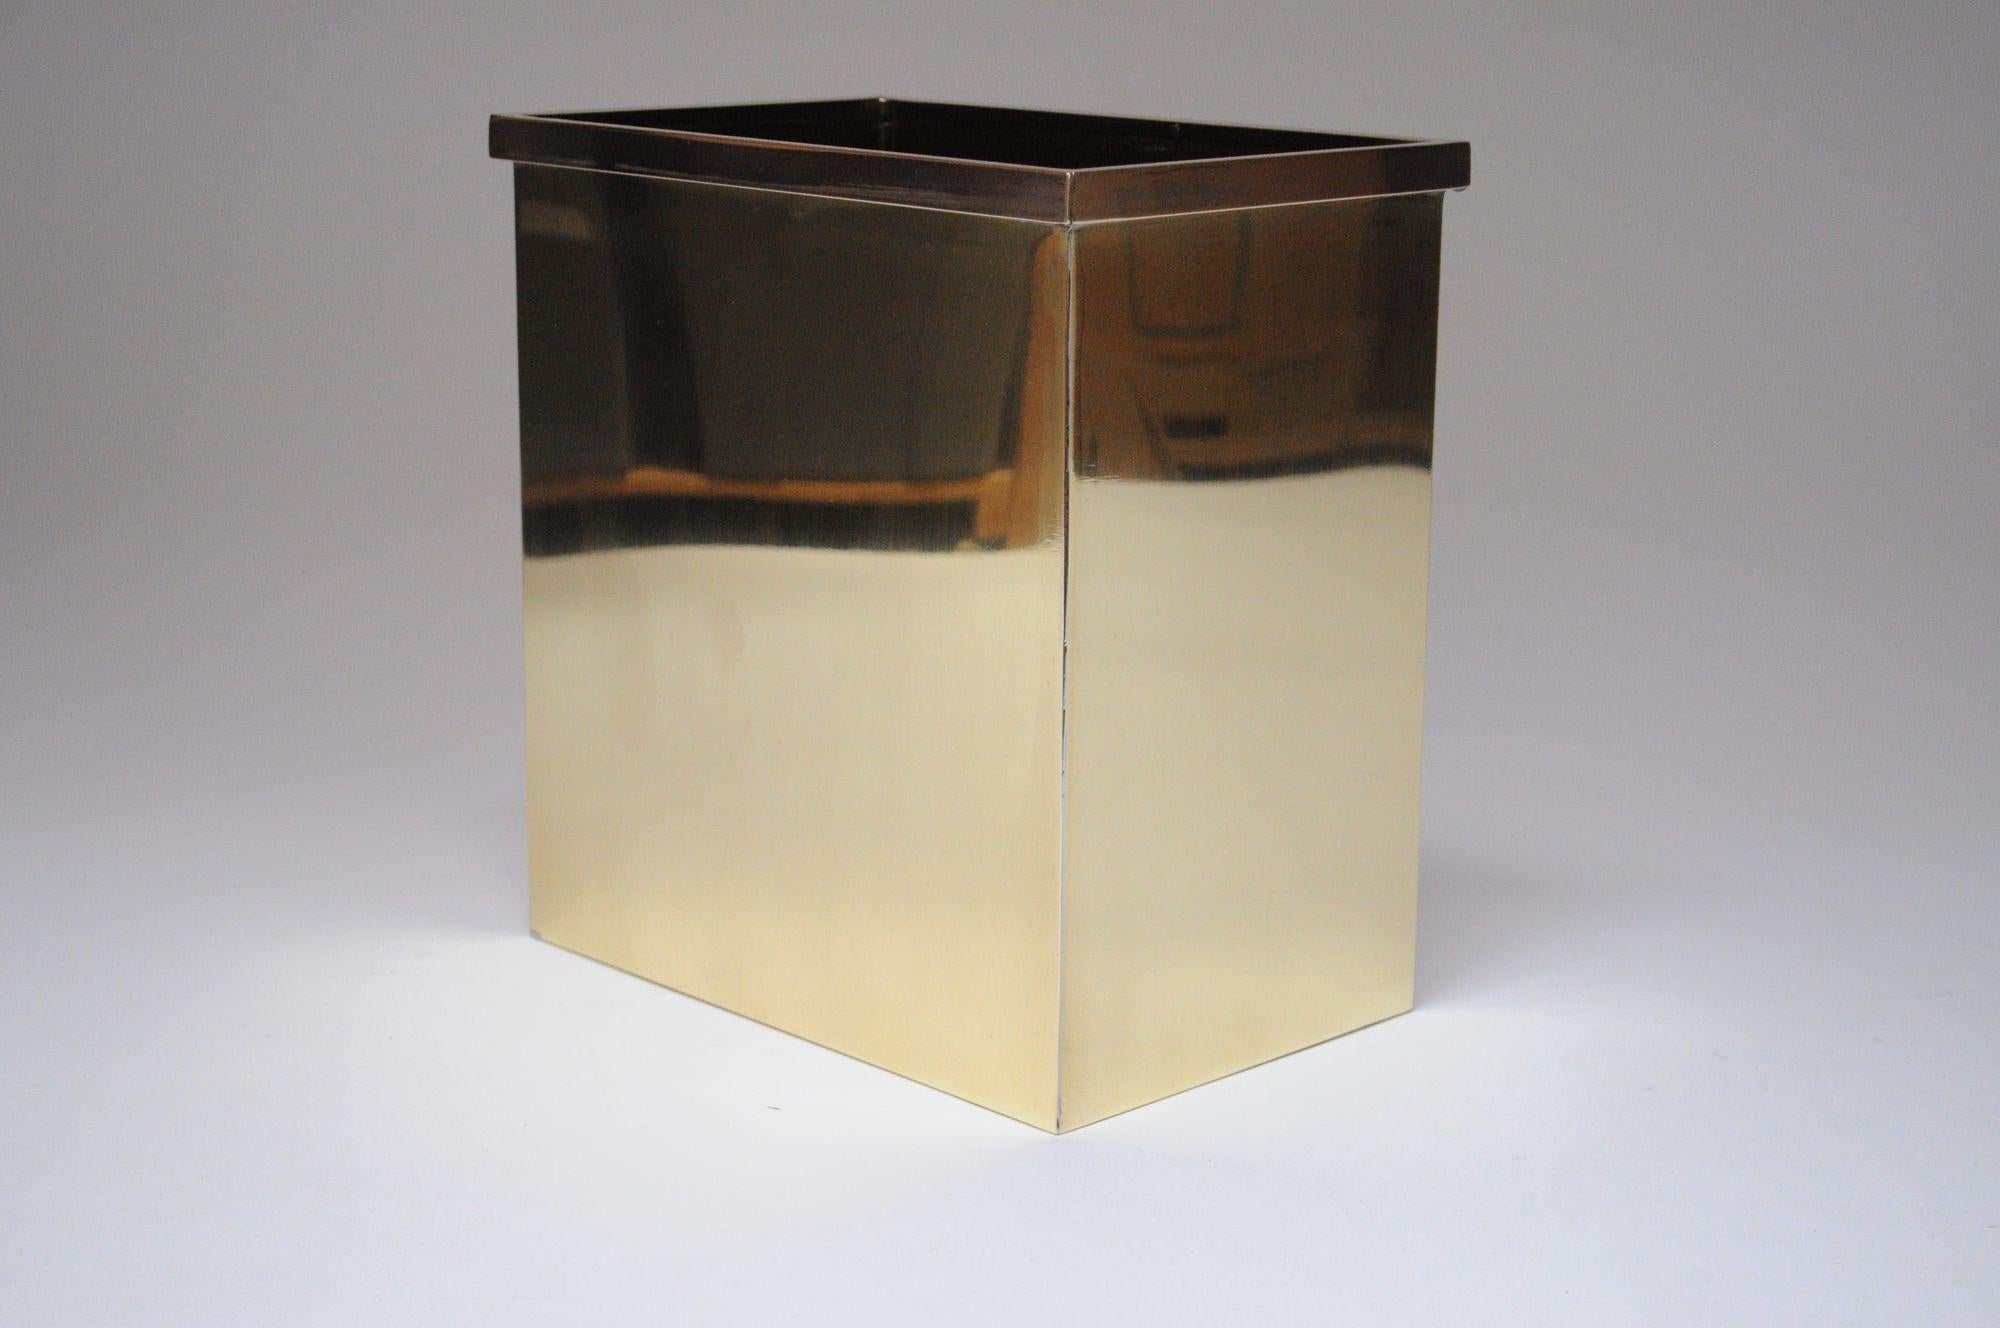 Vintage Hollywood Regency Style Polished Brass Wastebasket/Umbrella Stand In Good Condition For Sale In Brooklyn, NY